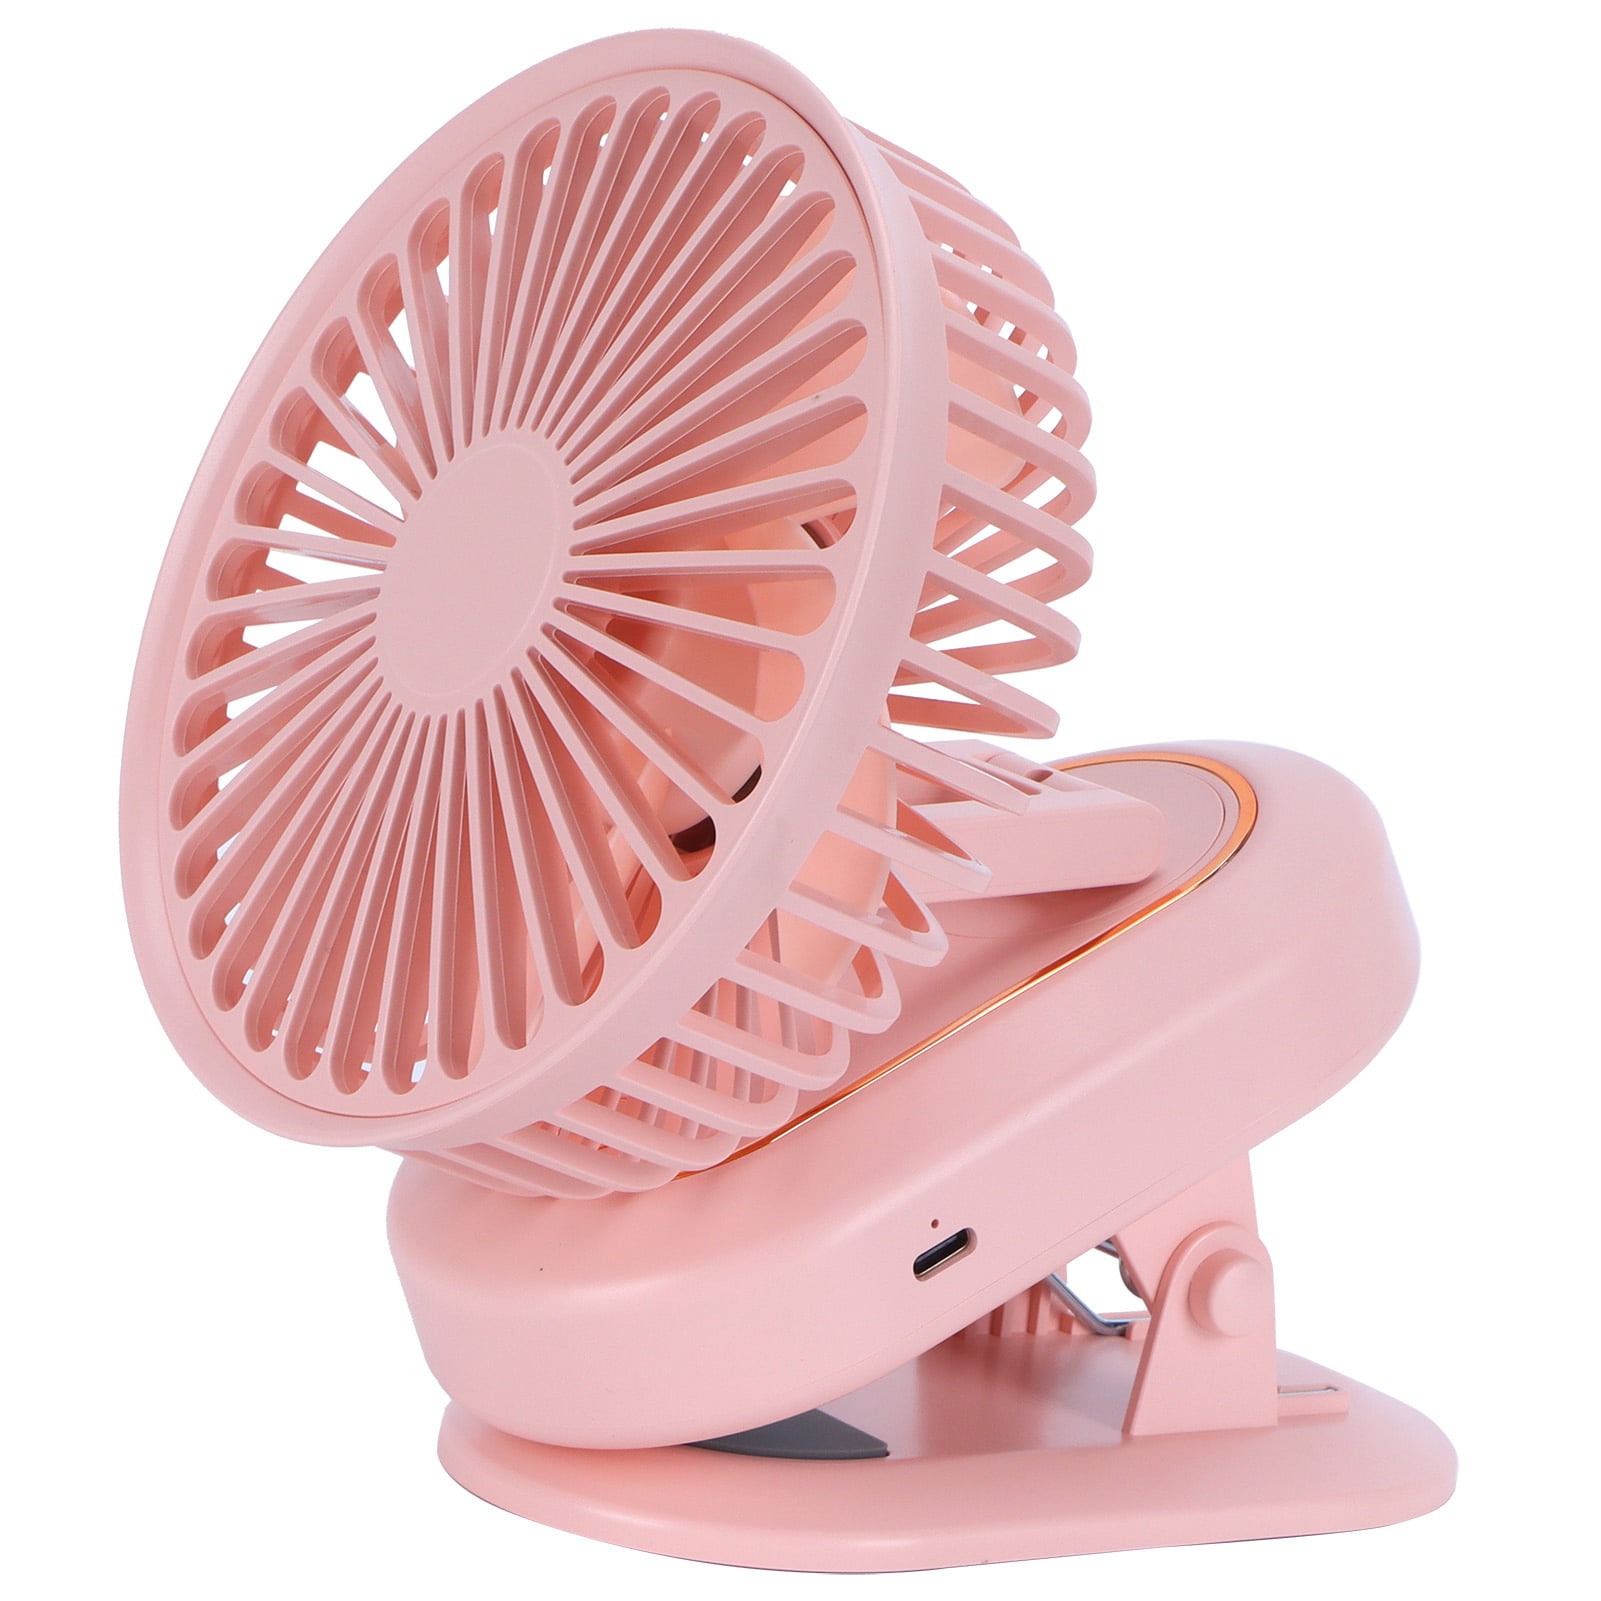 Small Fan USB Mini Charging Small Fan Portable Desktop Handheld Fan Gift Turn Page Third Gear Shaking Head Left and Right